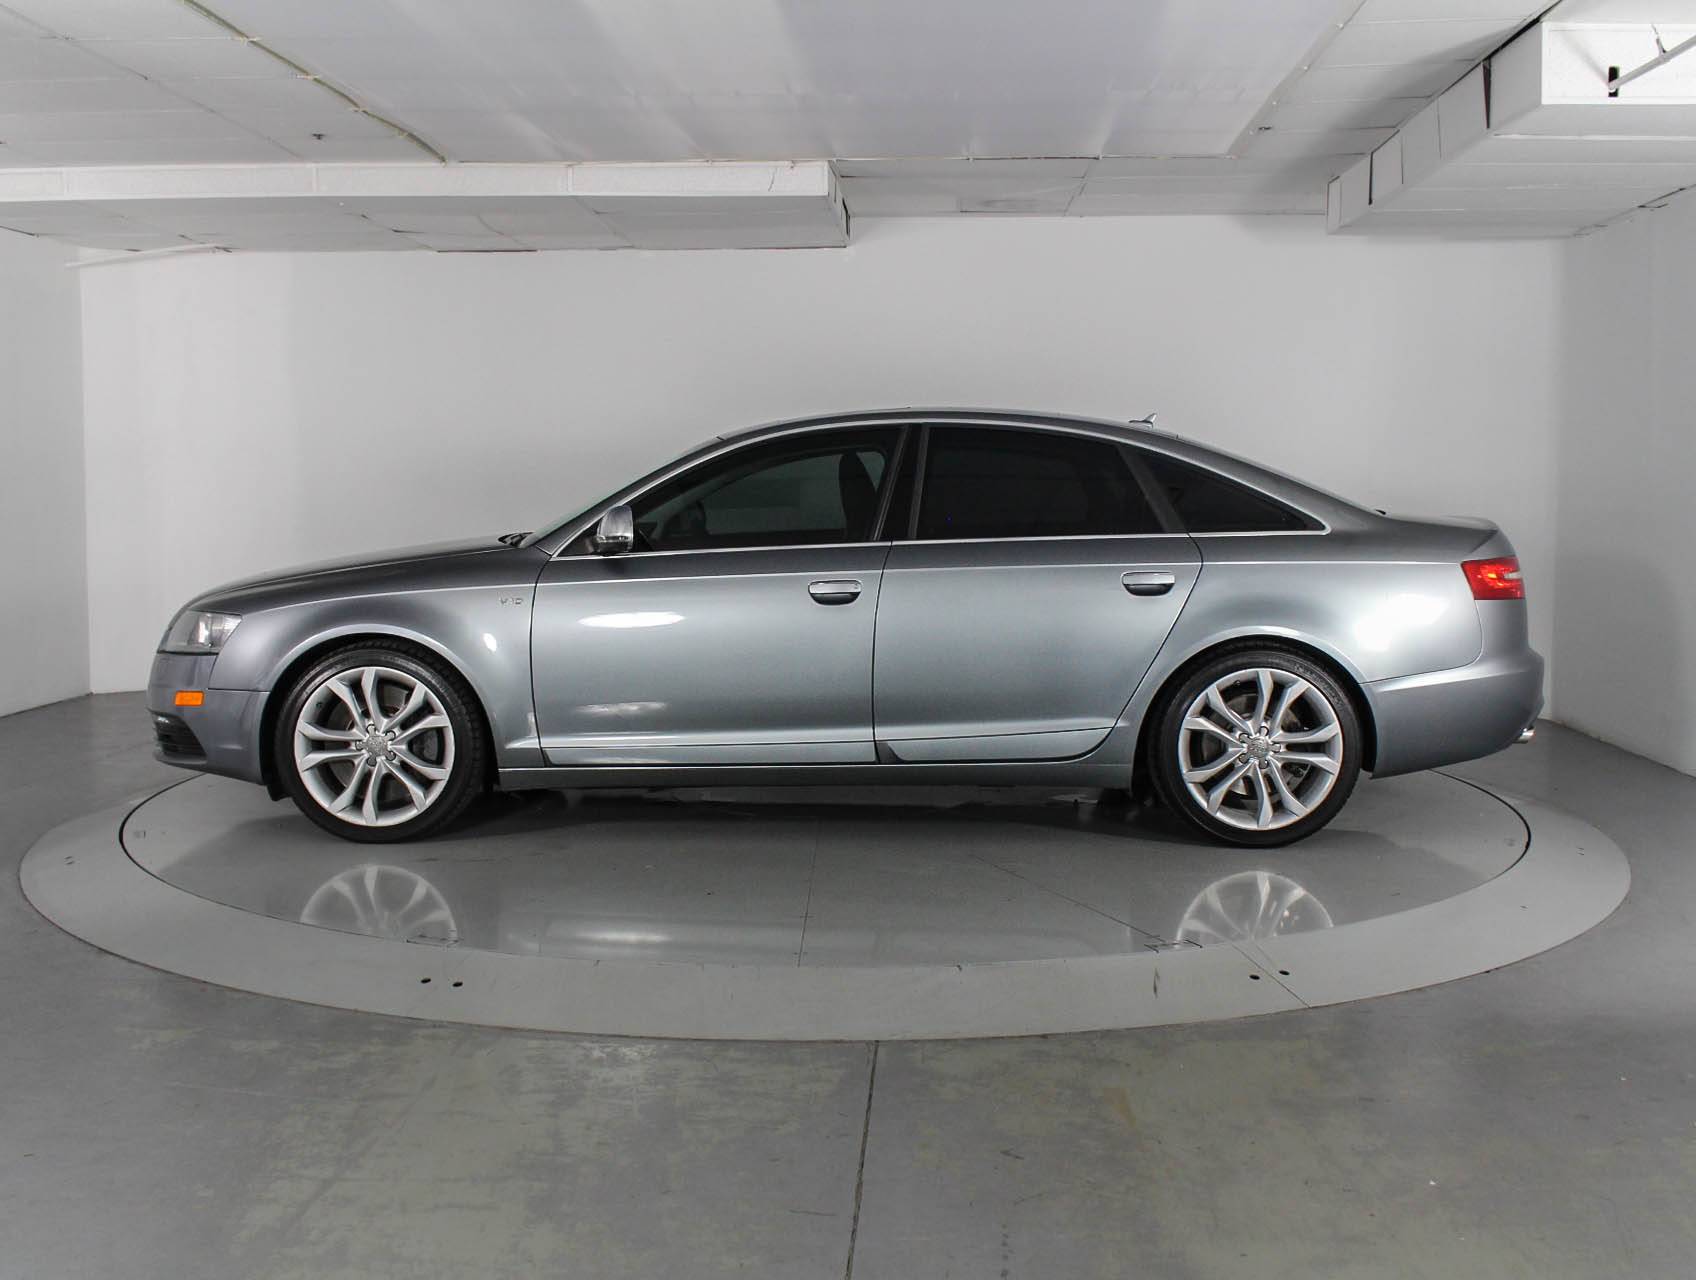 Used 2010 AUDI S6 PRESTIGE for sale in WEST PALM | 86284